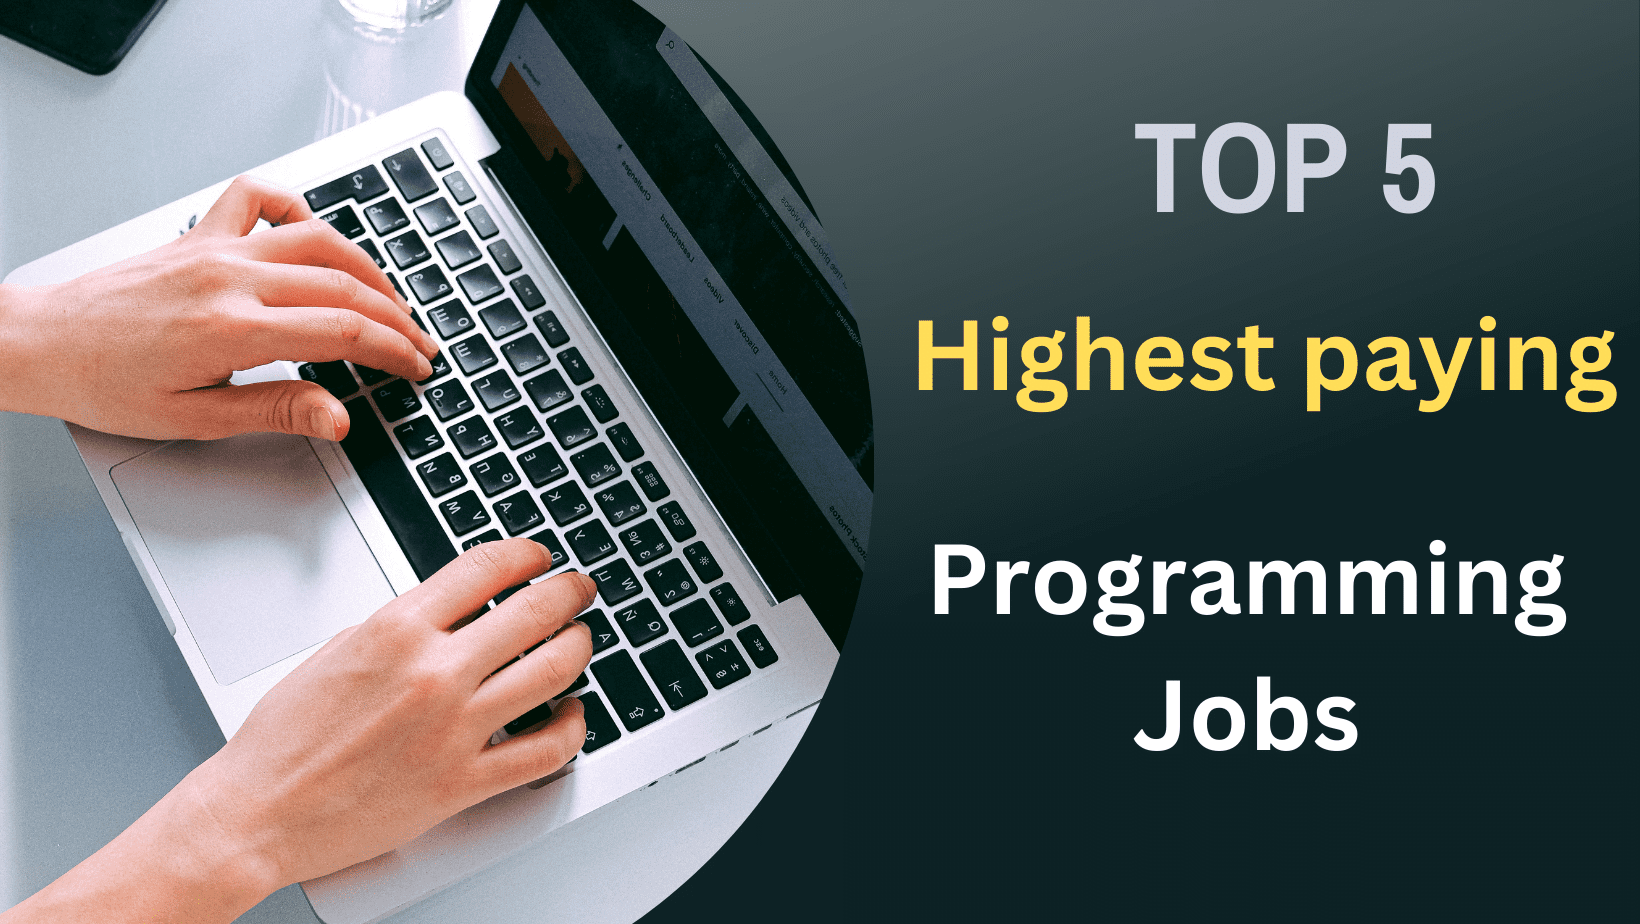 The Ultimate Guide to the Top 5 Highest Paying Programming Jobs